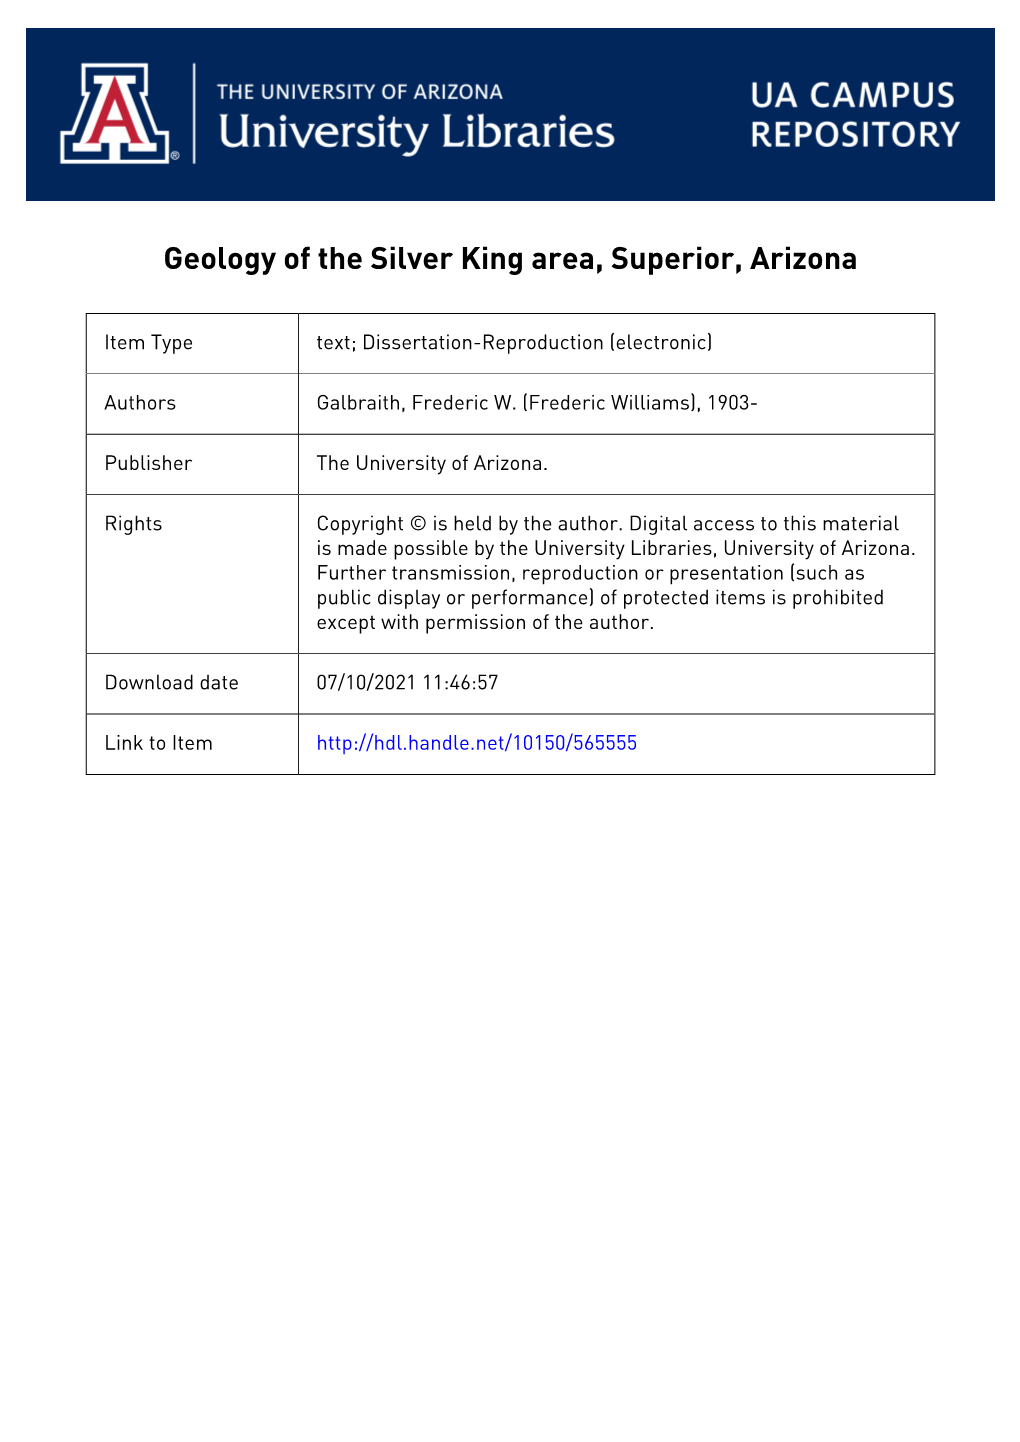 Geology of the Silver King Area, Superior, Arizona by Frederic